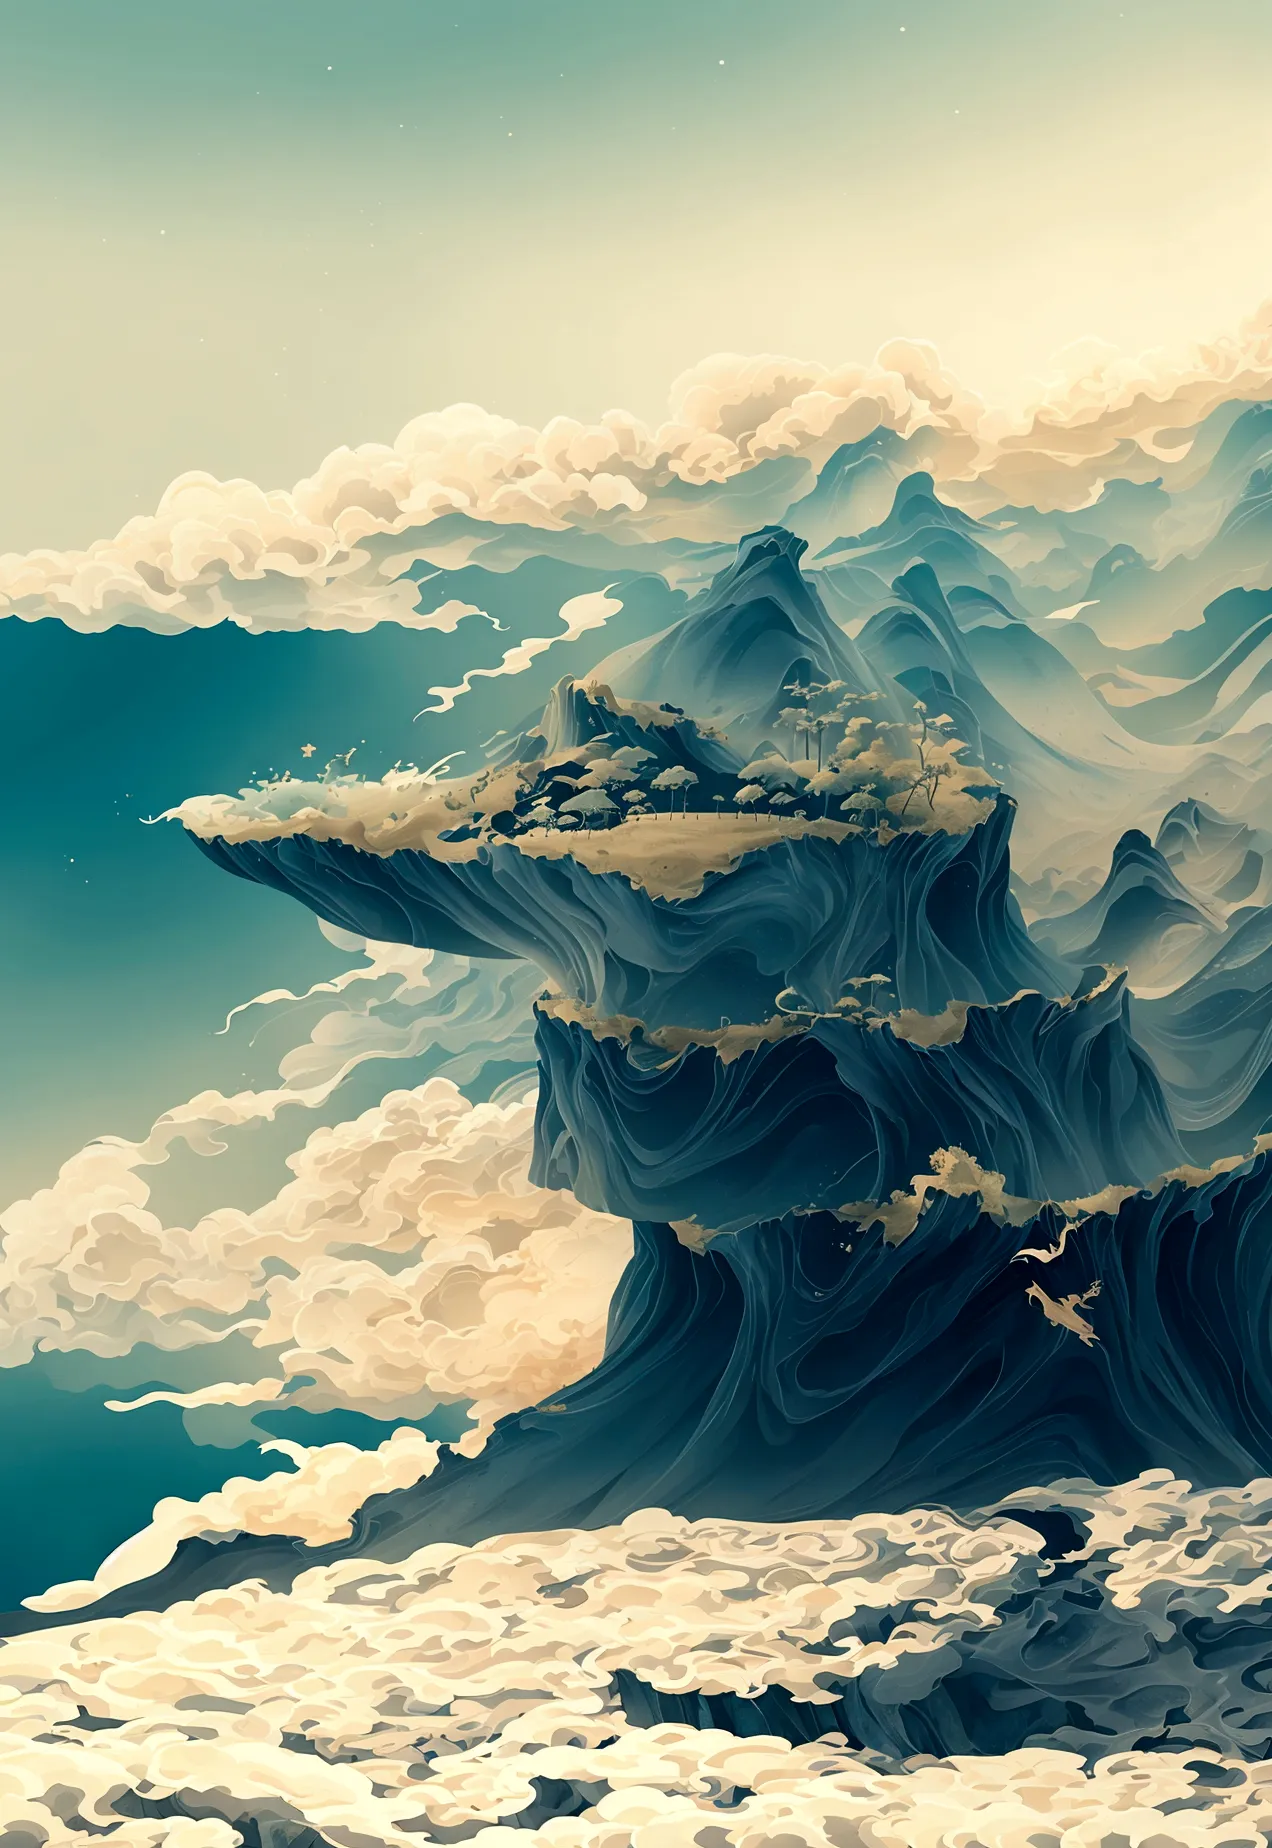 Generate a scene with a cliff from bottom to top and a sea of clouds below